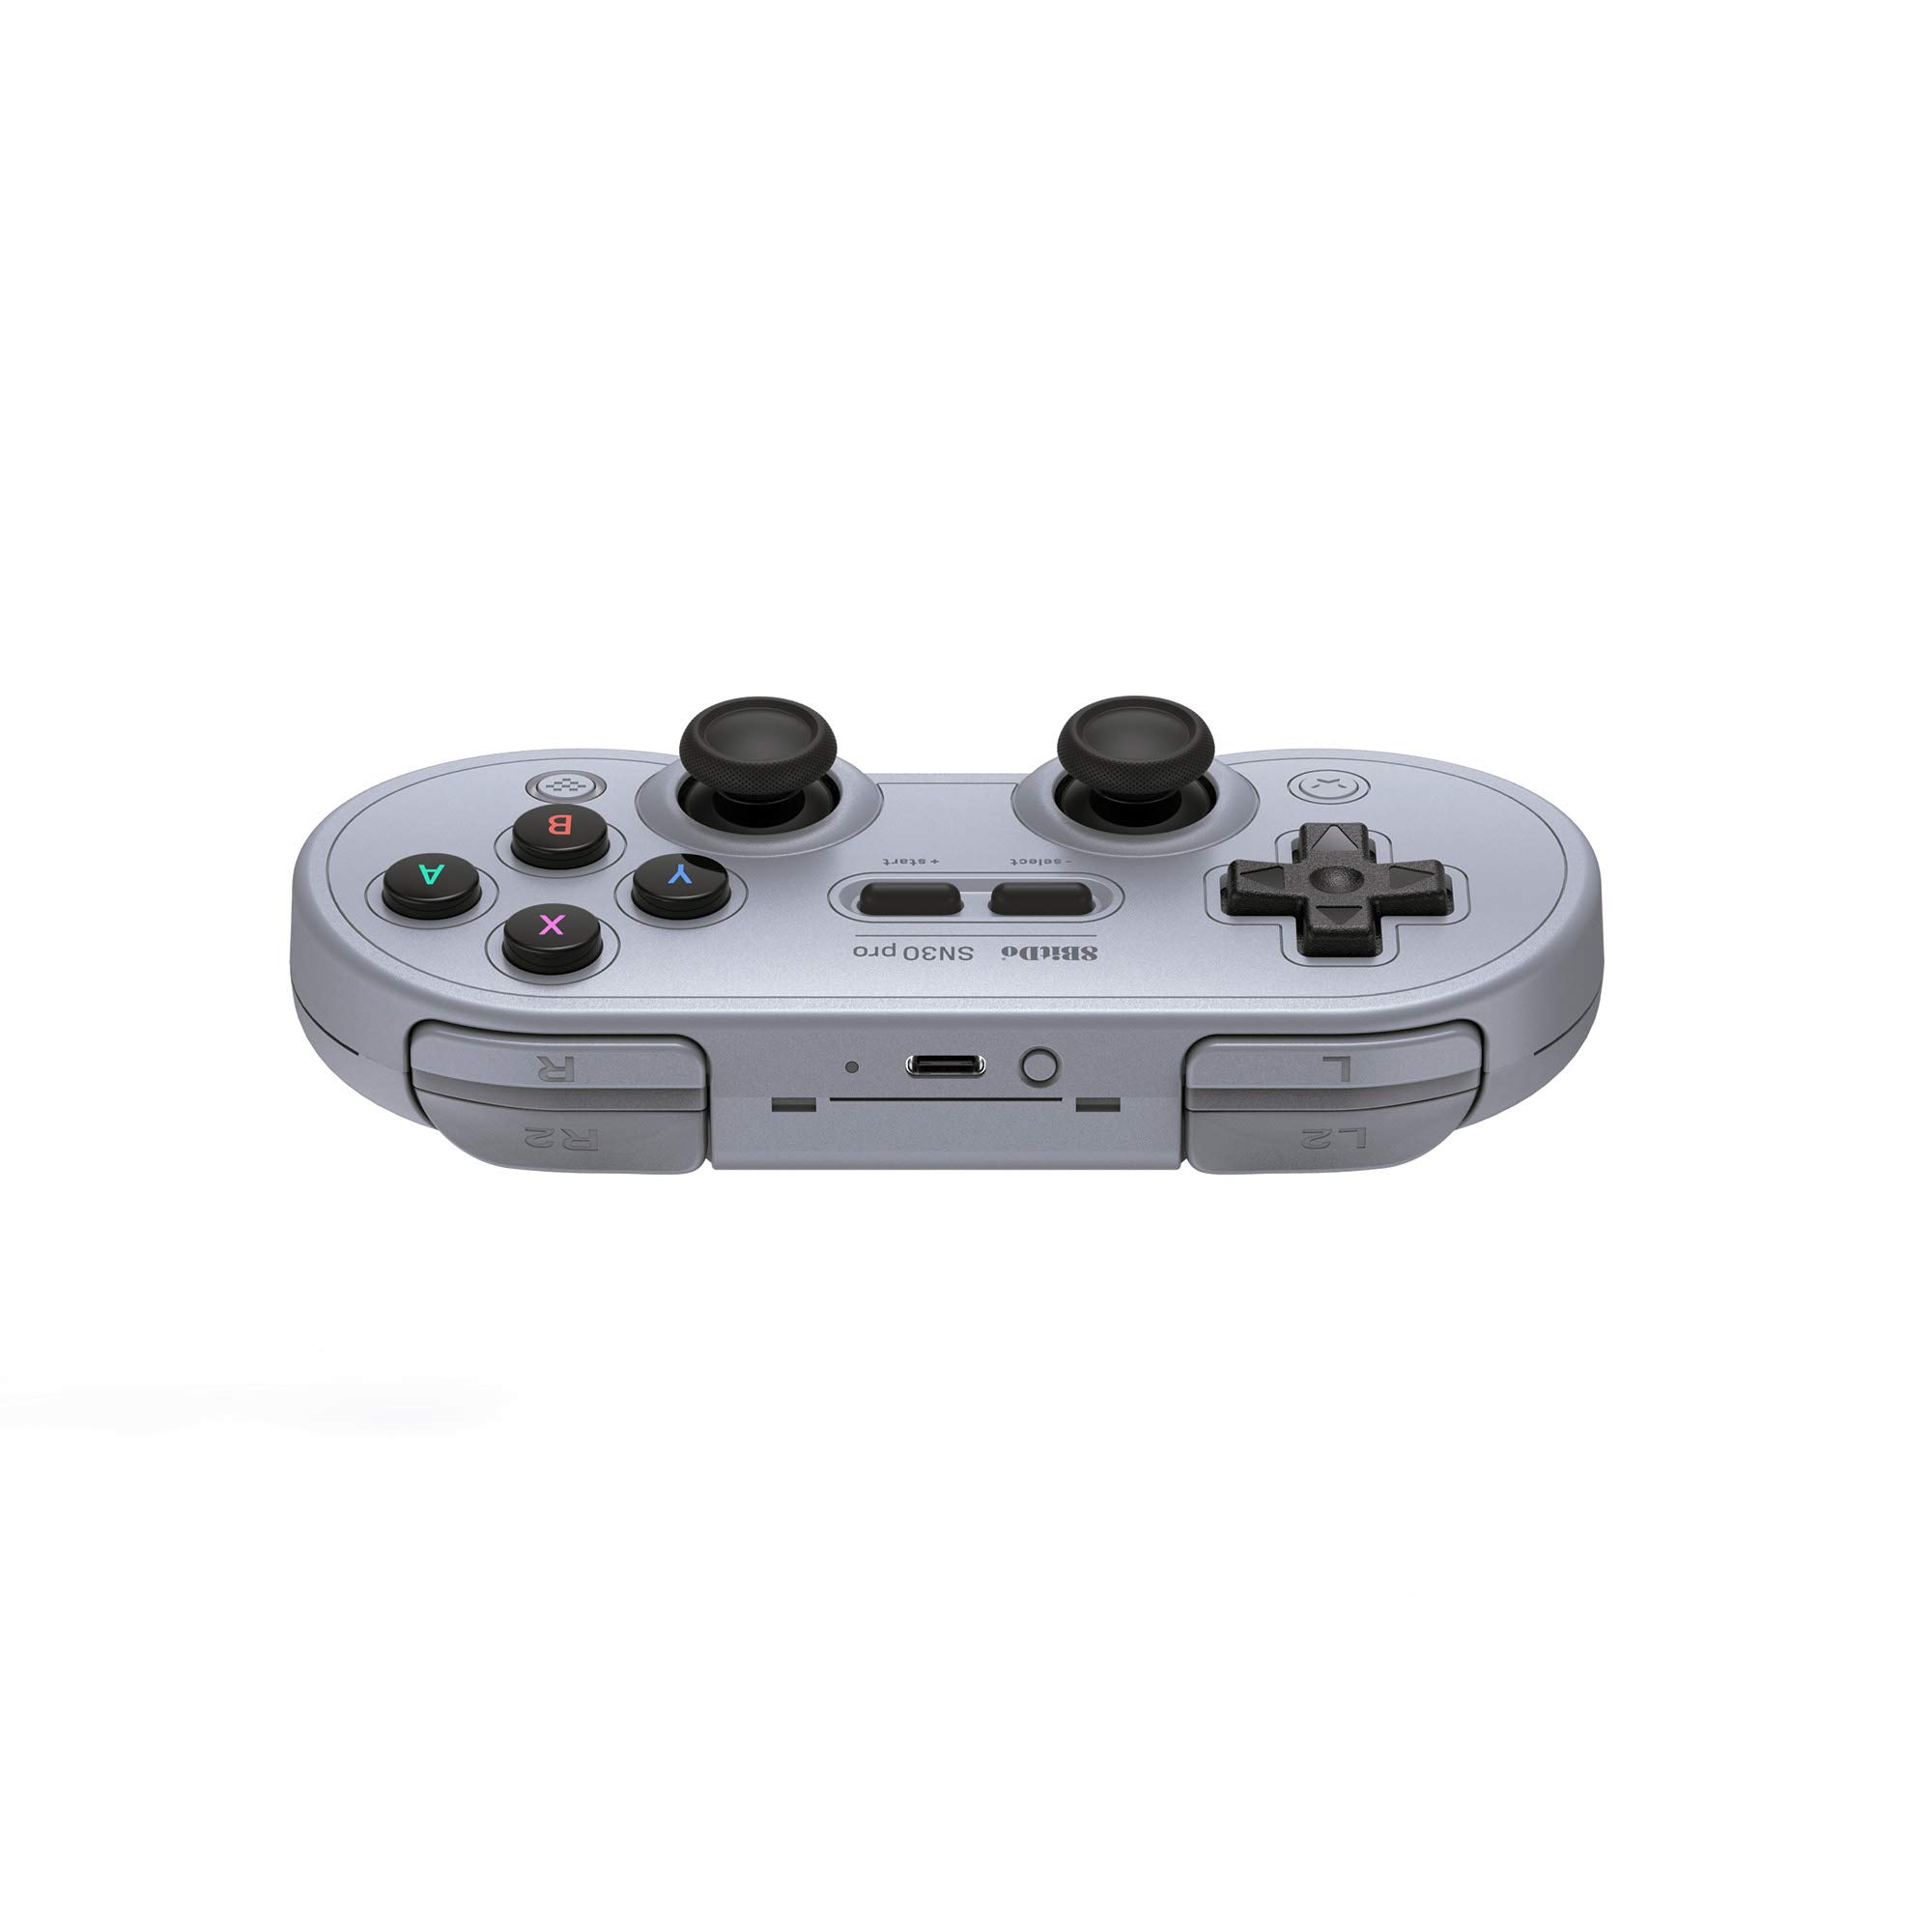 8Bitdo Sn30 Pro Bluetooth Controller for Switch/Switch OLED, PC, macOS, Android, Steam Deck & Raspberry Pi (Gray Edition)